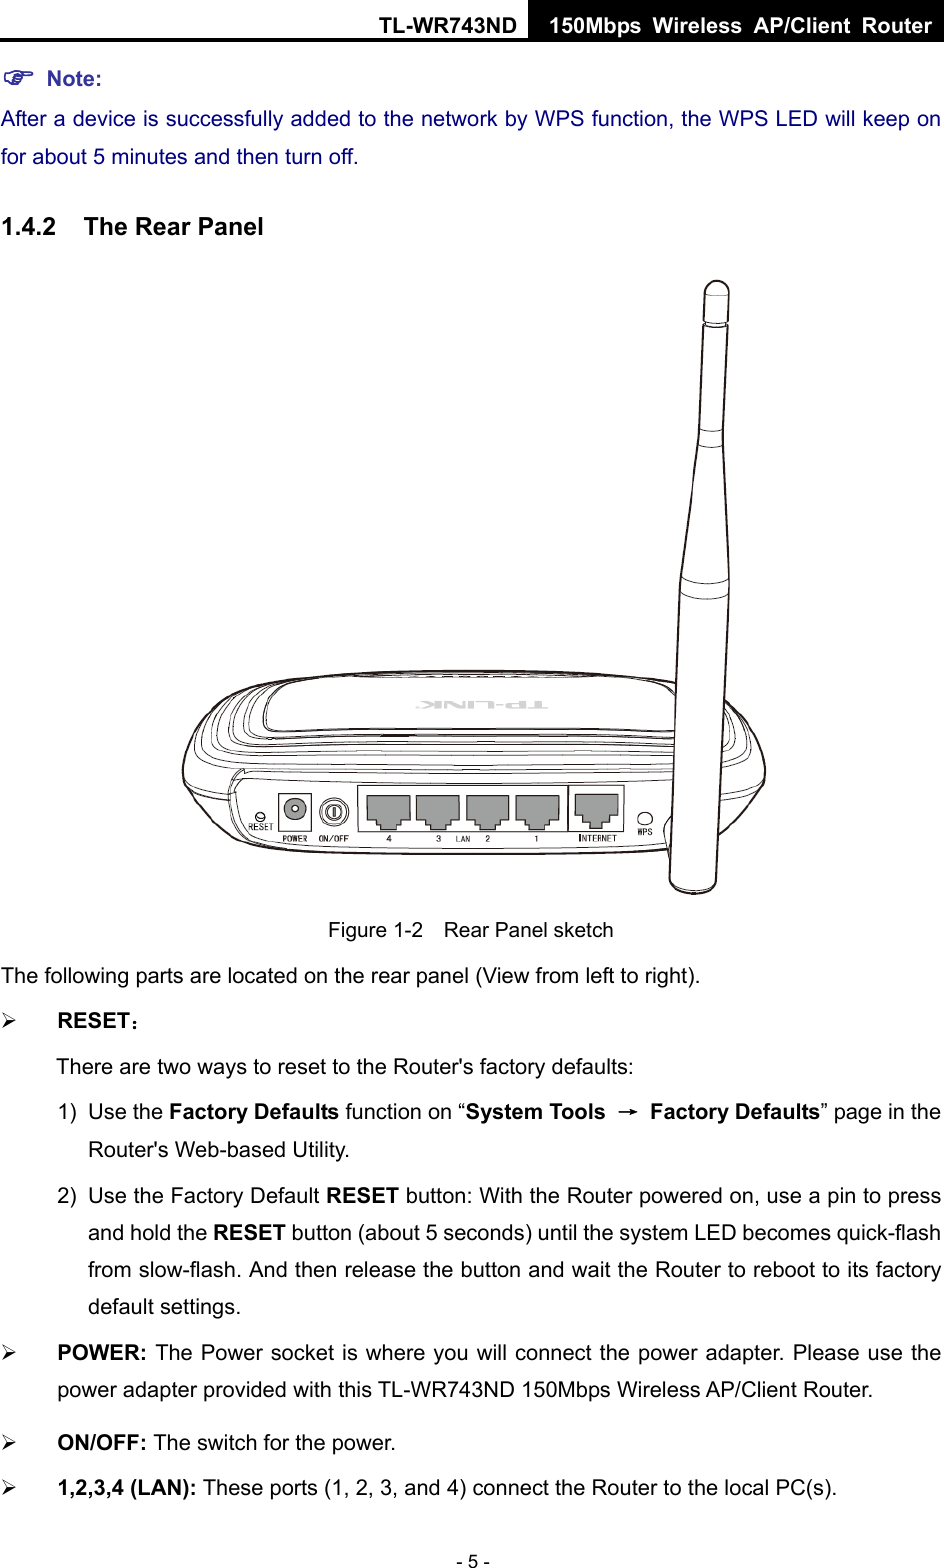 TL-WR743ND 150Mbps Wireless AP/Client Router - 5 -  Note: After a device is successfully added to the network by WPS function, the WPS LED will keep on for about 5 minutes and then turn off.   1.4.2  The Rear Panel  Figure 1-2    Rear Panel sketch The following parts are located on the rear panel (View from left to right).  RESET： There are two ways to reset to the Router&apos;s factory defaults: 1) Use the Factory Defaults function on “System Tools  → Factory Defaults” page in the Router&apos;s Web-based Utility. 2)  Use the Factory Default RESET button: With the Router powered on, use a pin to press and hold the RESET button (about 5 seconds) until the system LED becomes quick-flash from slow-flash. And then release the button and wait the Router to reboot to its factory default settings.  POWER: The Power socket is where you will connect the power adapter. Please use the power adapter provided with this TL-WR743ND 150Mbps Wireless AP/Client Router.  ON/OFF: The switch for the power.  1,2,3,4 (LAN): These ports (1, 2, 3, and 4) connect the Router to the local PC(s). 